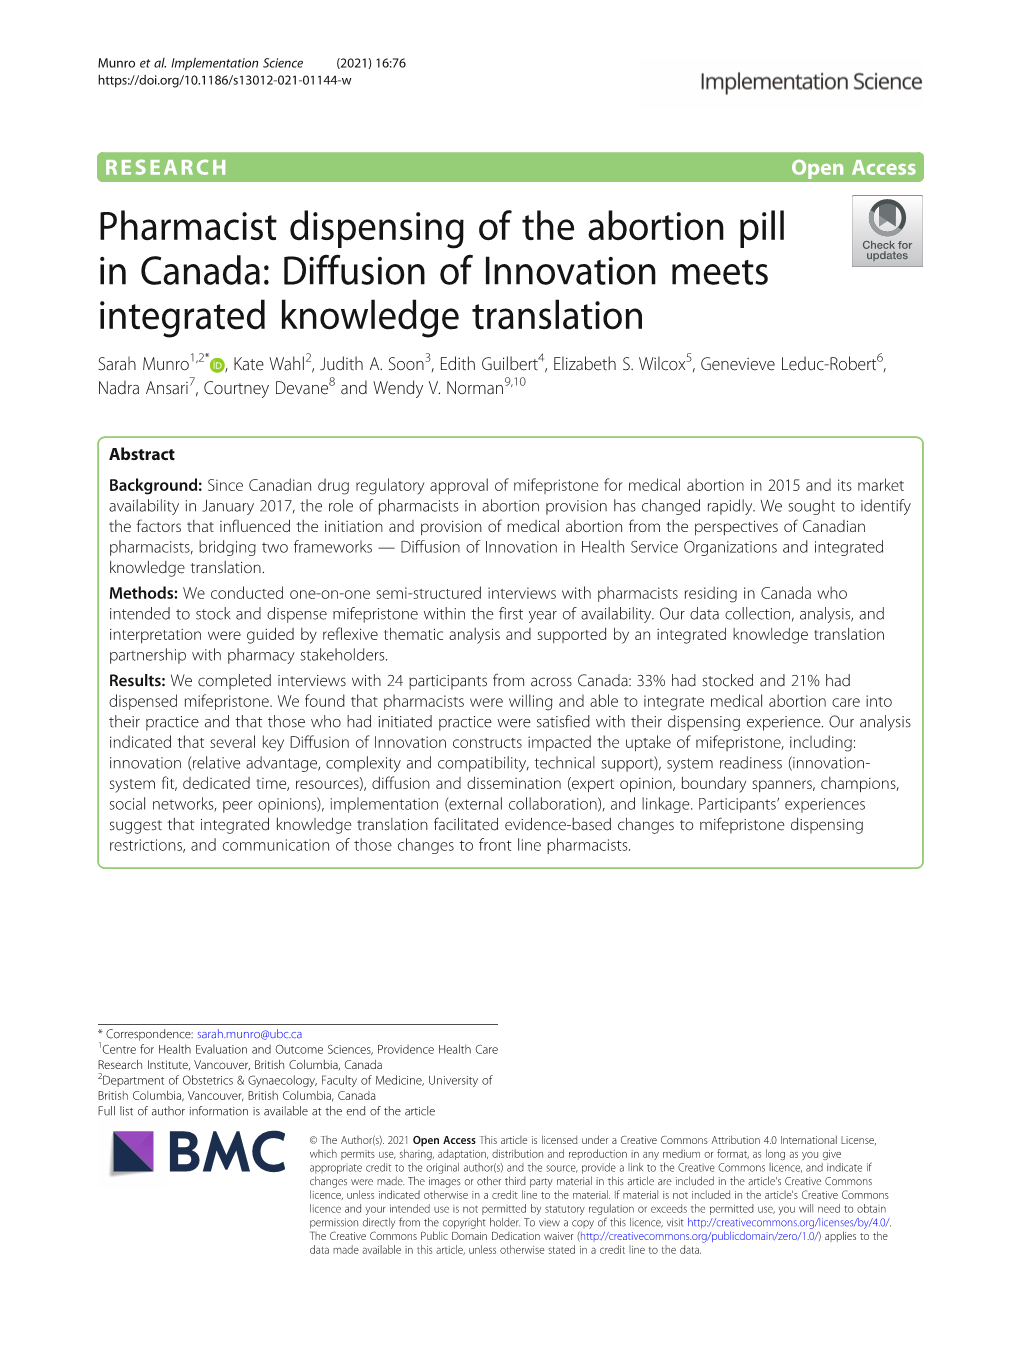 Pharmacist Dispensing of the Abortion Pill in Canada: Diffusion of Innovation Meets Integrated Knowledge Translation Sarah Munro1,2* , Kate Wahl2, Judith A